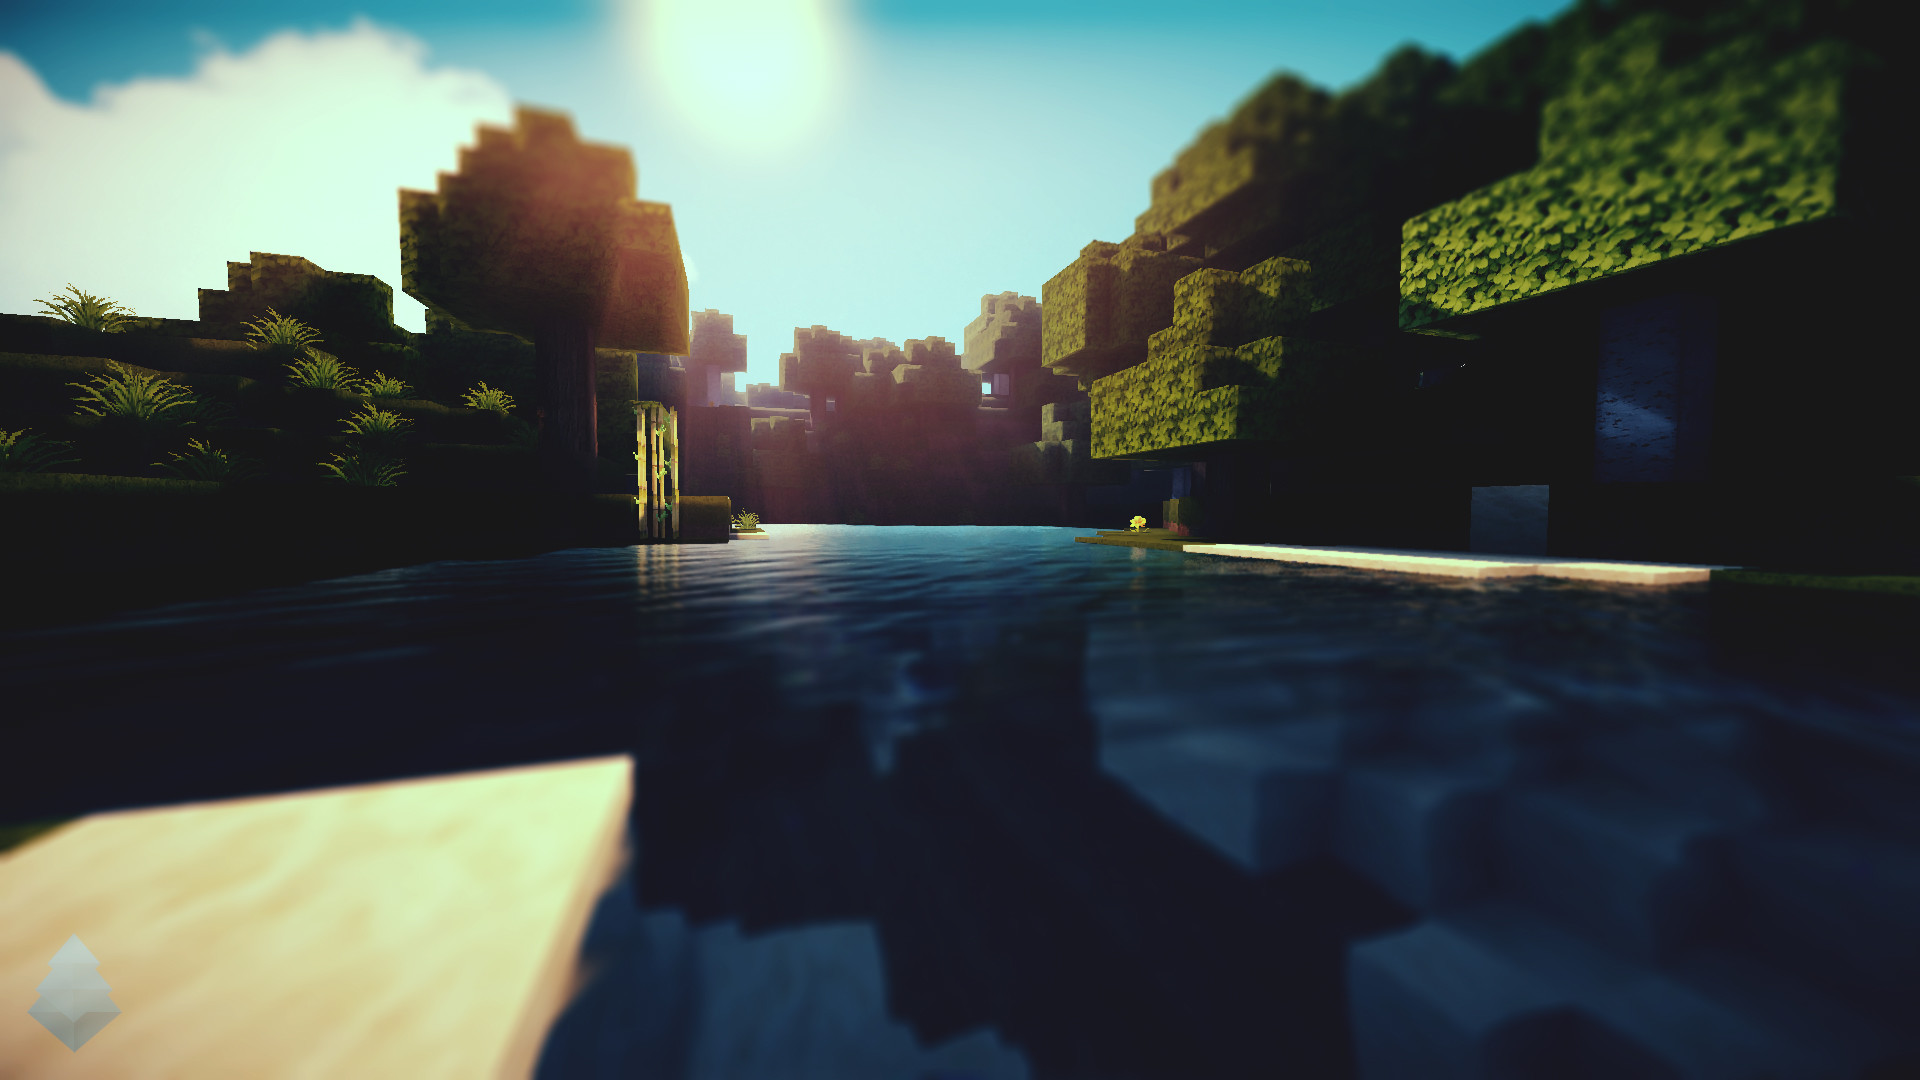 1920x1080 ... Cool Wallpapers Group (86 ) minecraft wallpaper | Minecraft Wallpaper  #1 by ~AlphaSonam on .